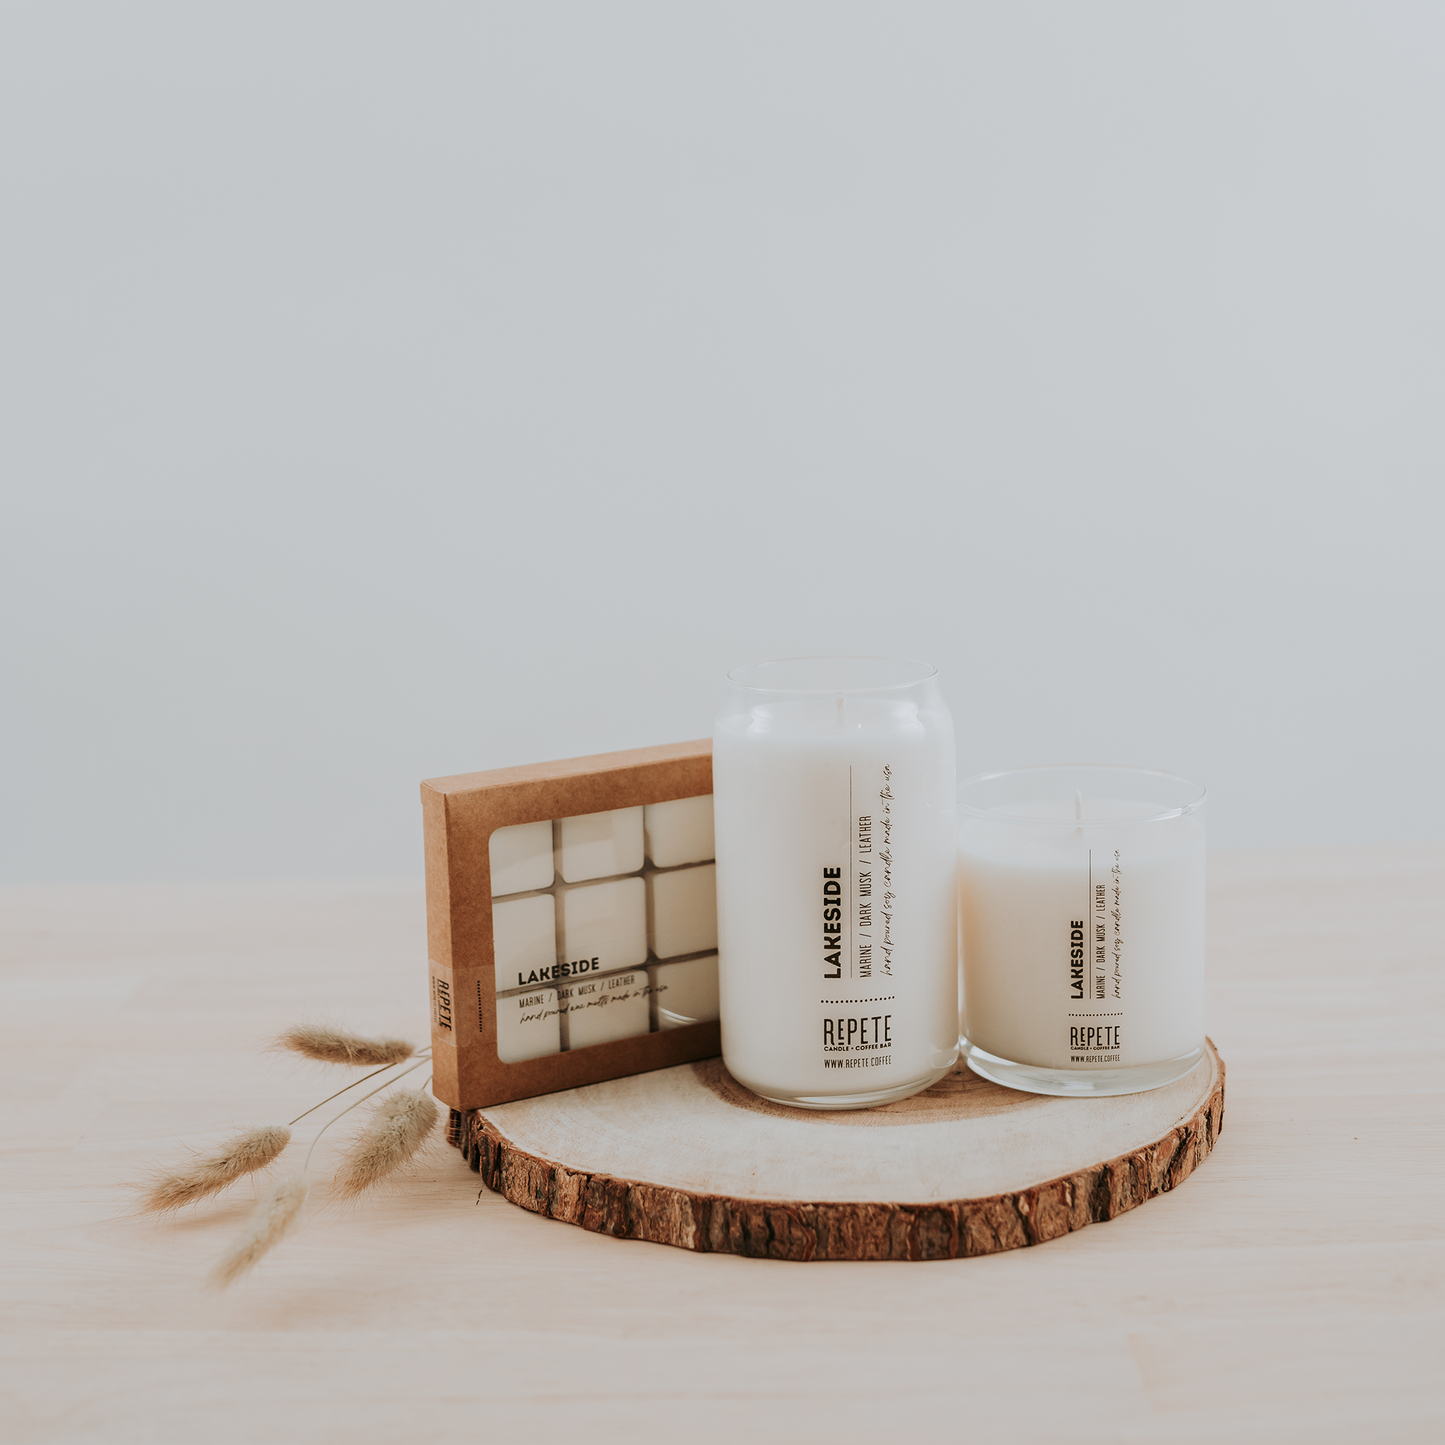 Lakeside scented products from Repete Candle and Coffee Bar